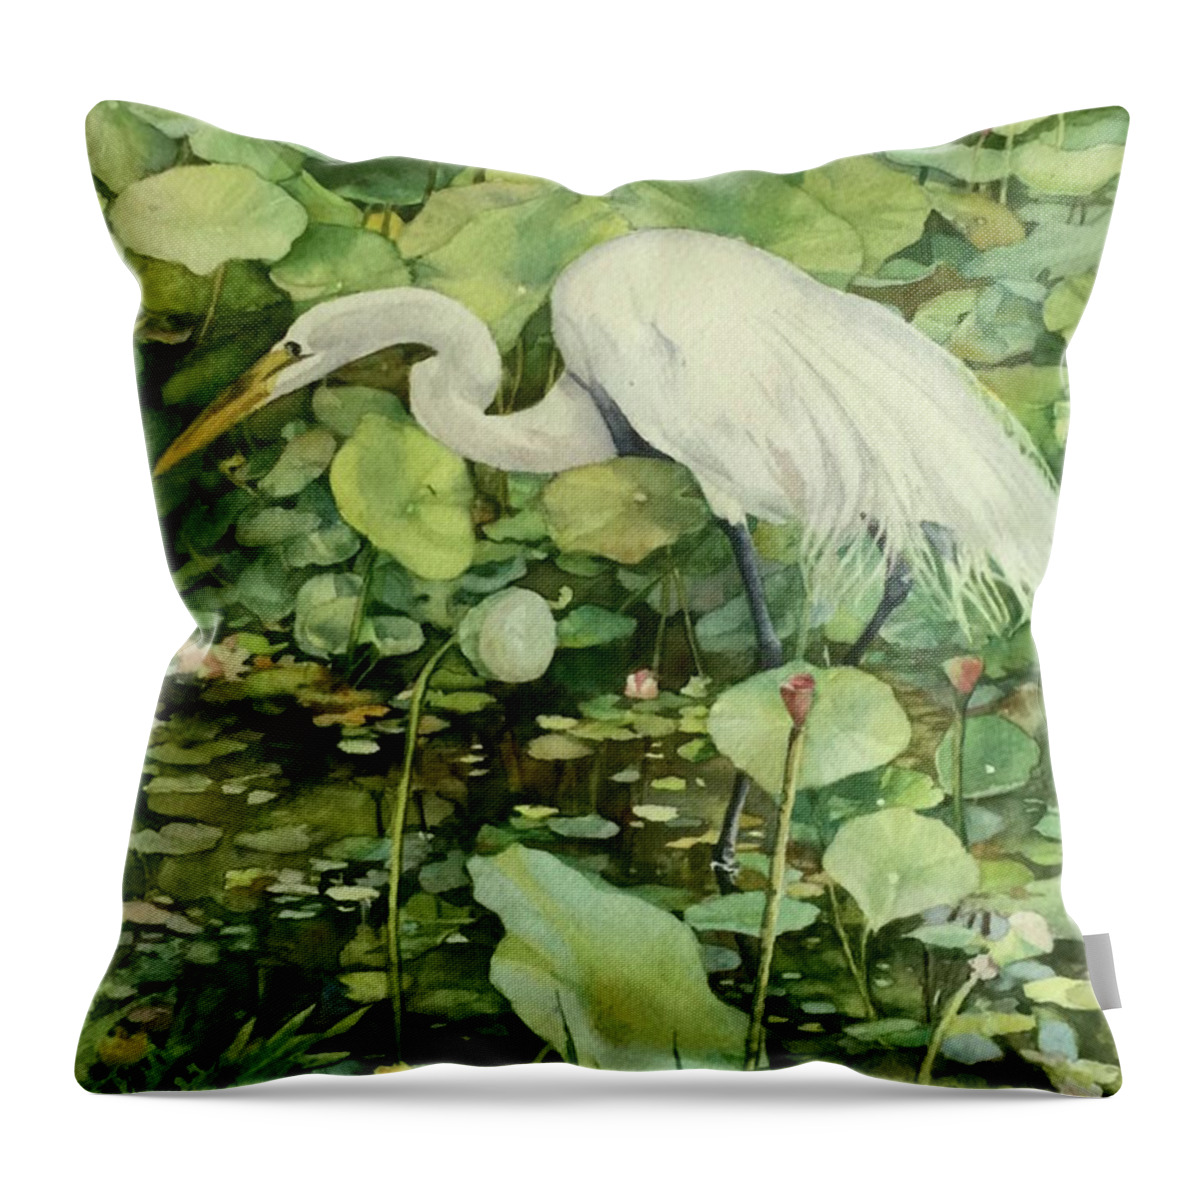 Heron Throw Pillow featuring the painting Le Heron by Francoise Chauray